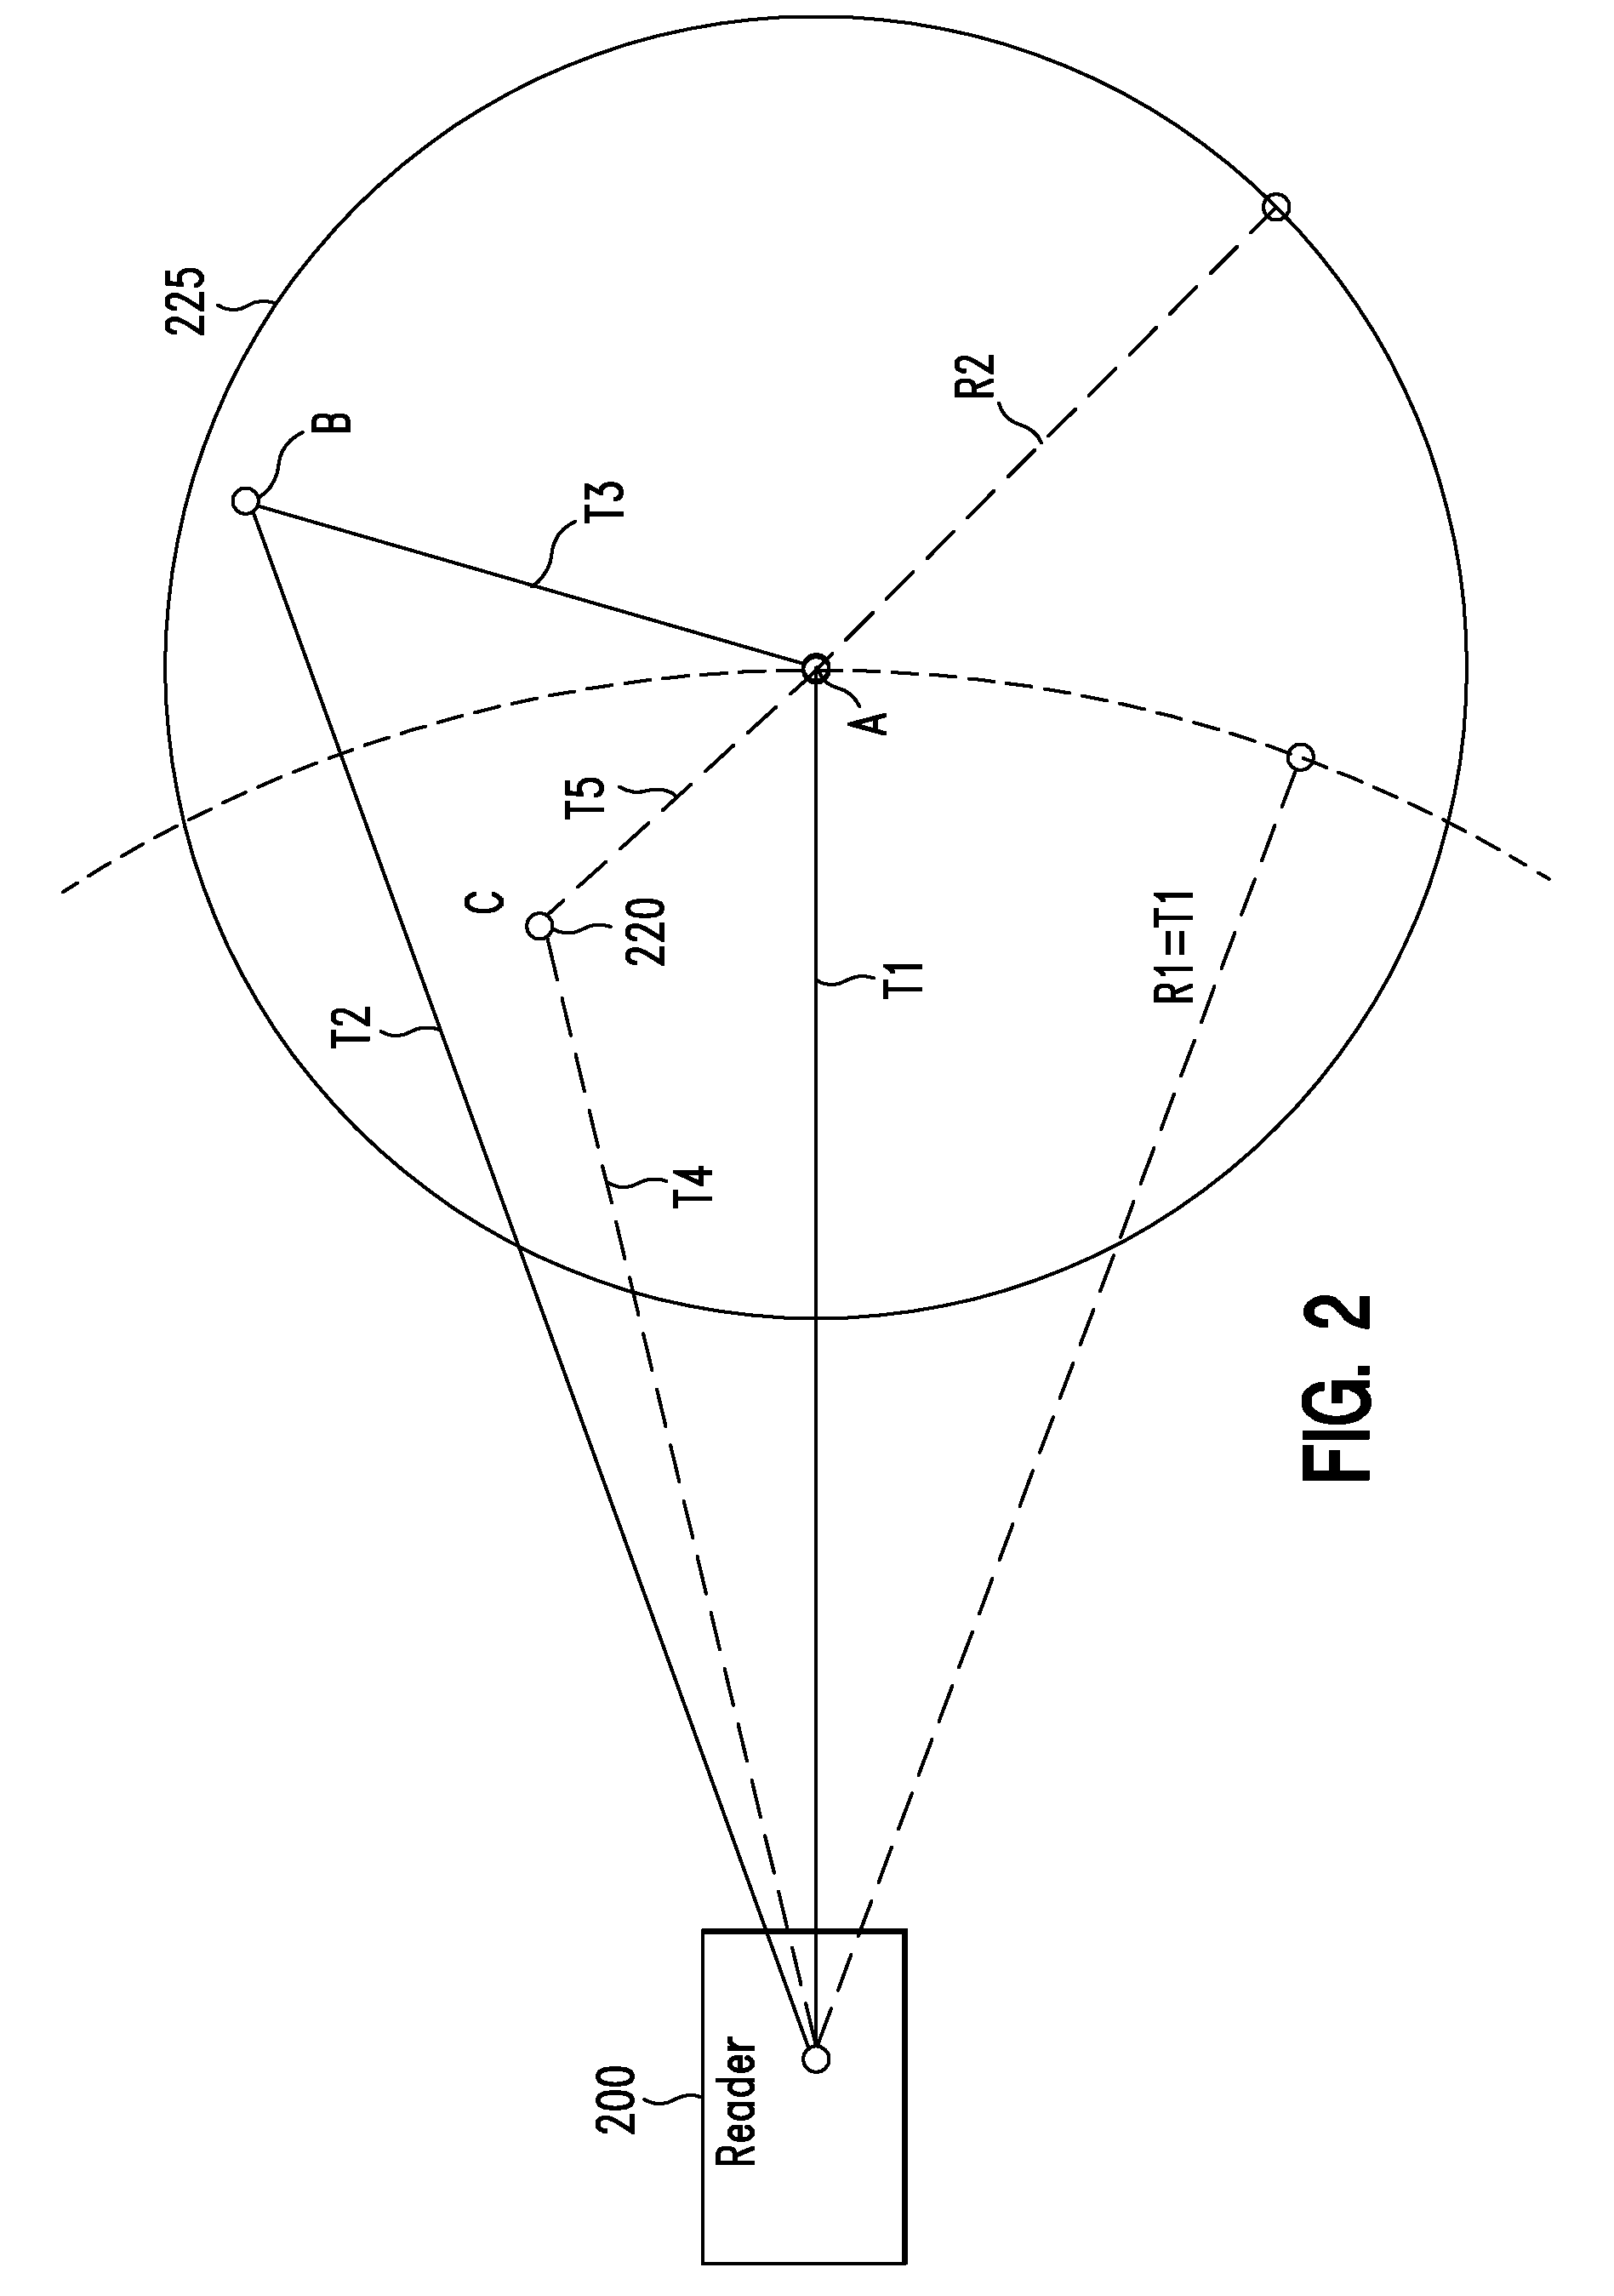 Location localization method and system